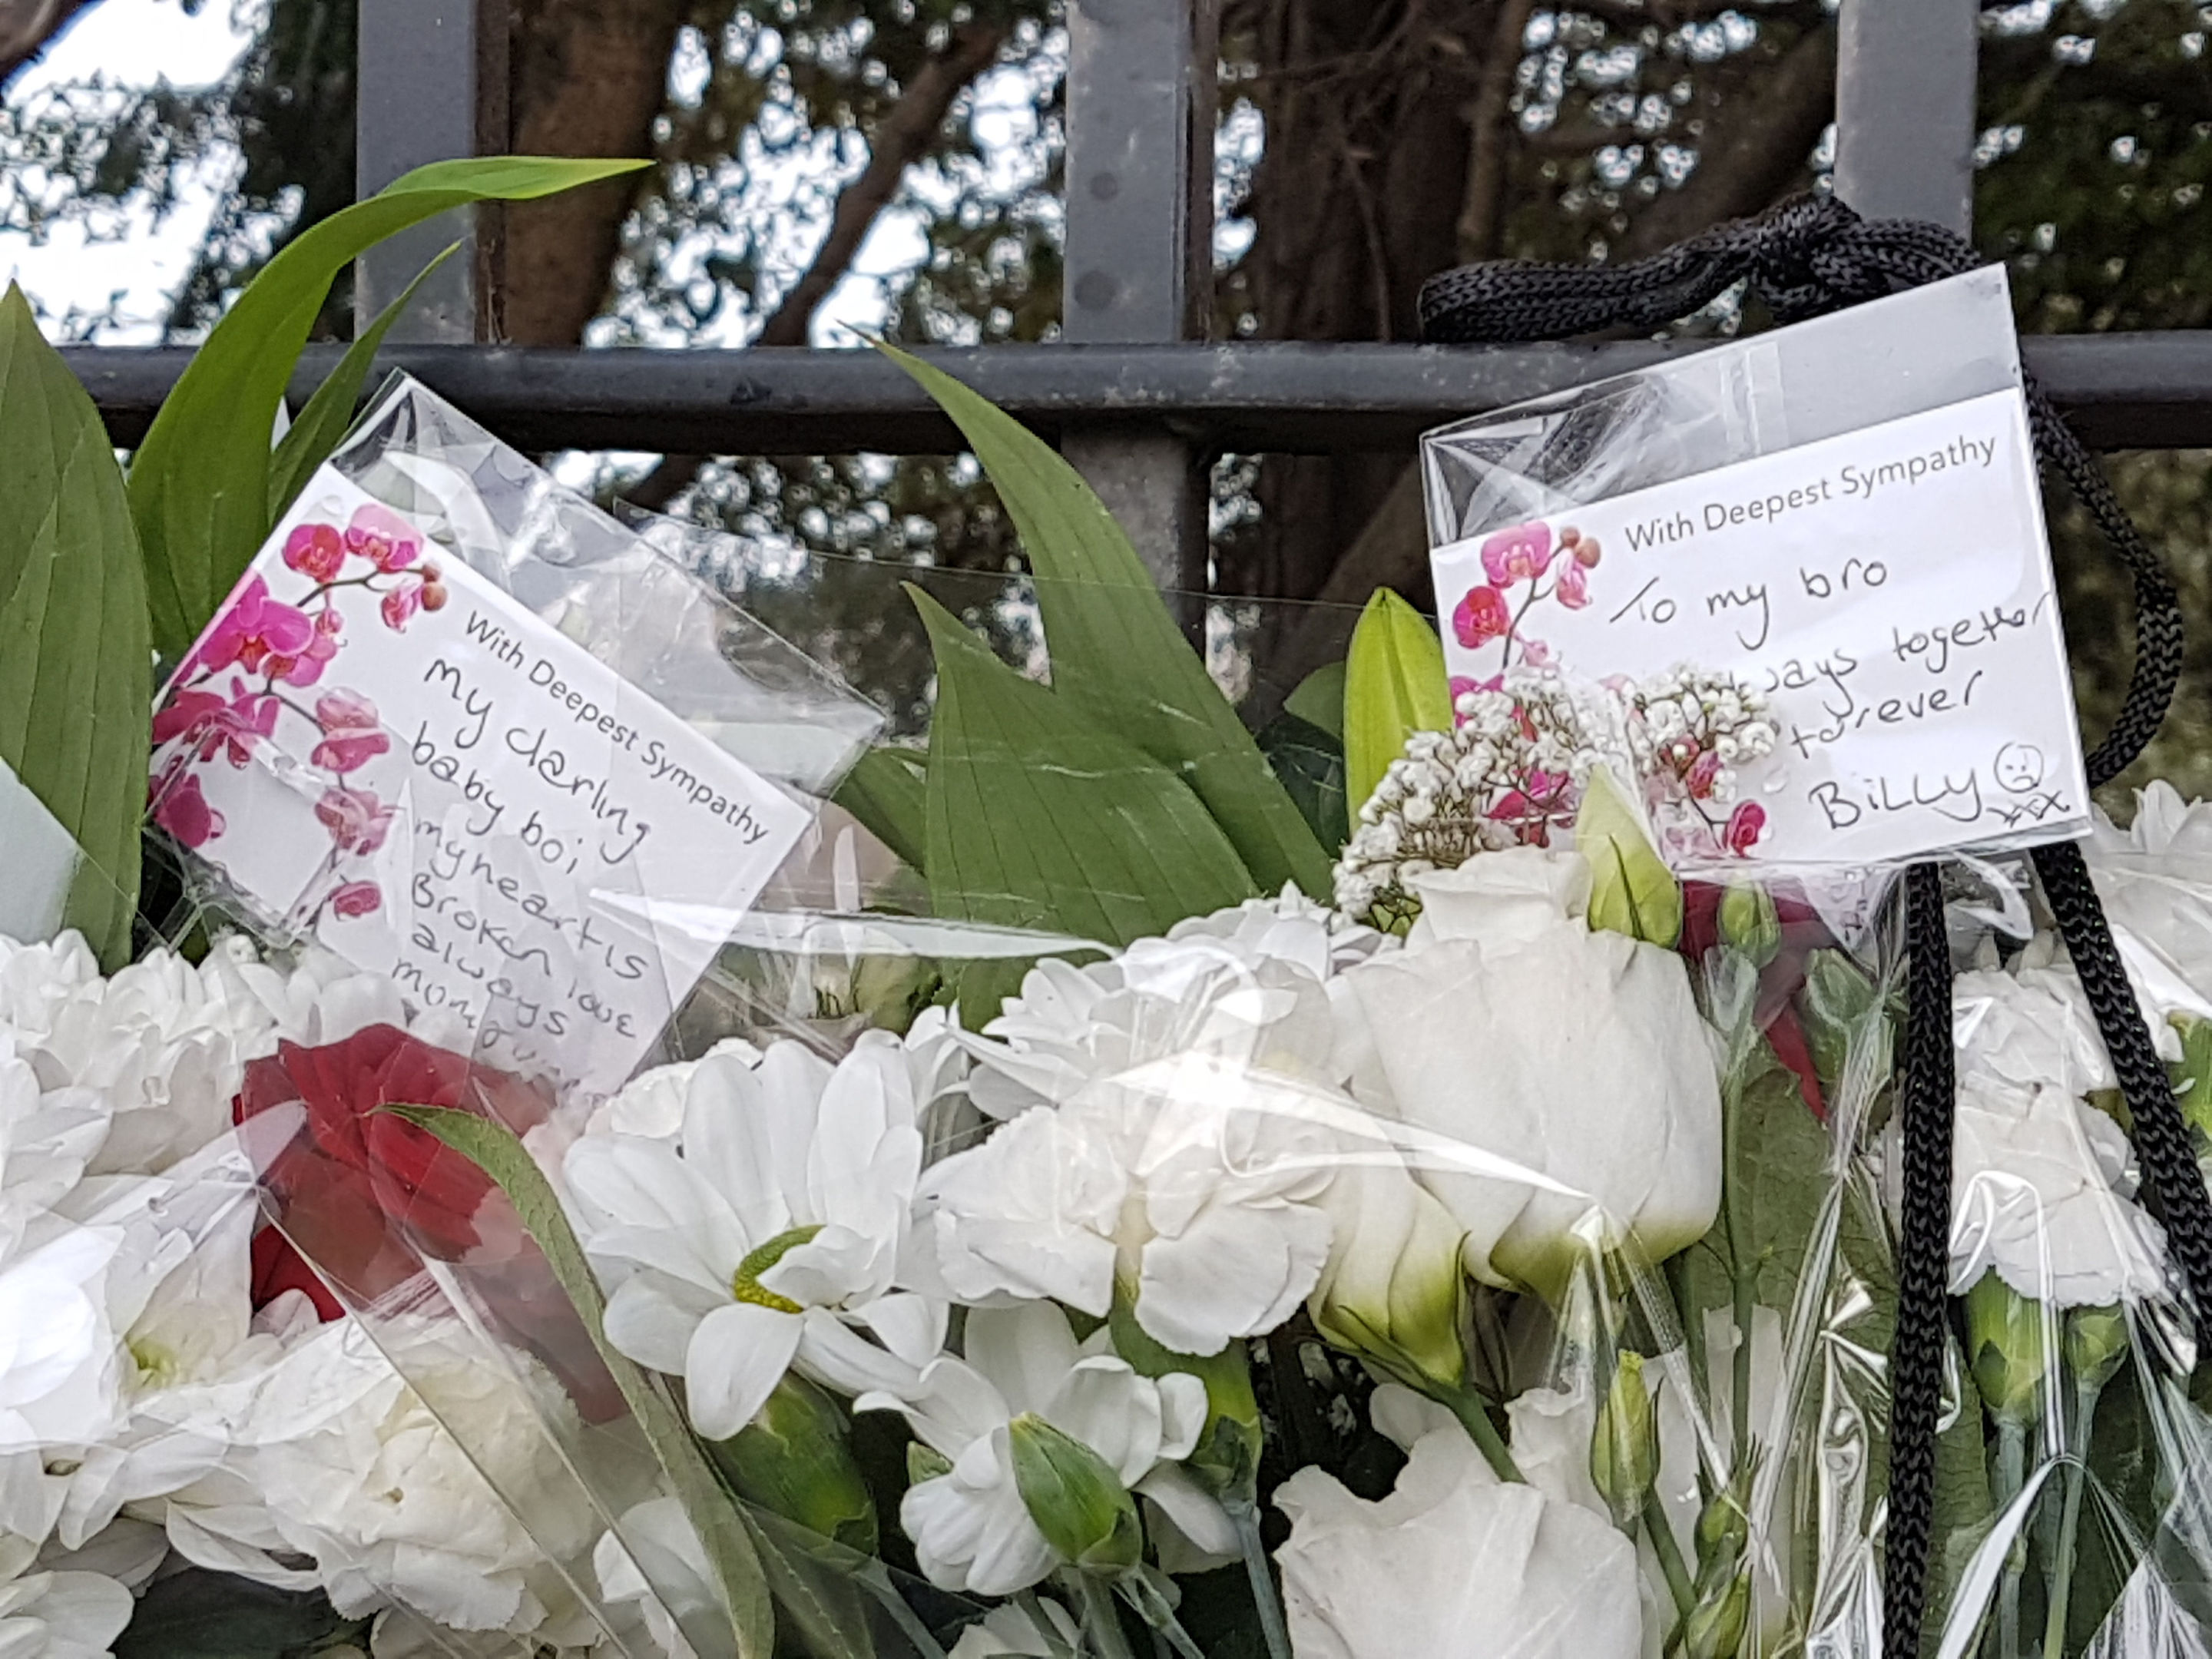 Floral tributes left near the scene in Shepiston Lane in Hayes, west London where three teenage boys have died after a car ploughed into a bus stop. (Tess De La Mare/PA Wire)